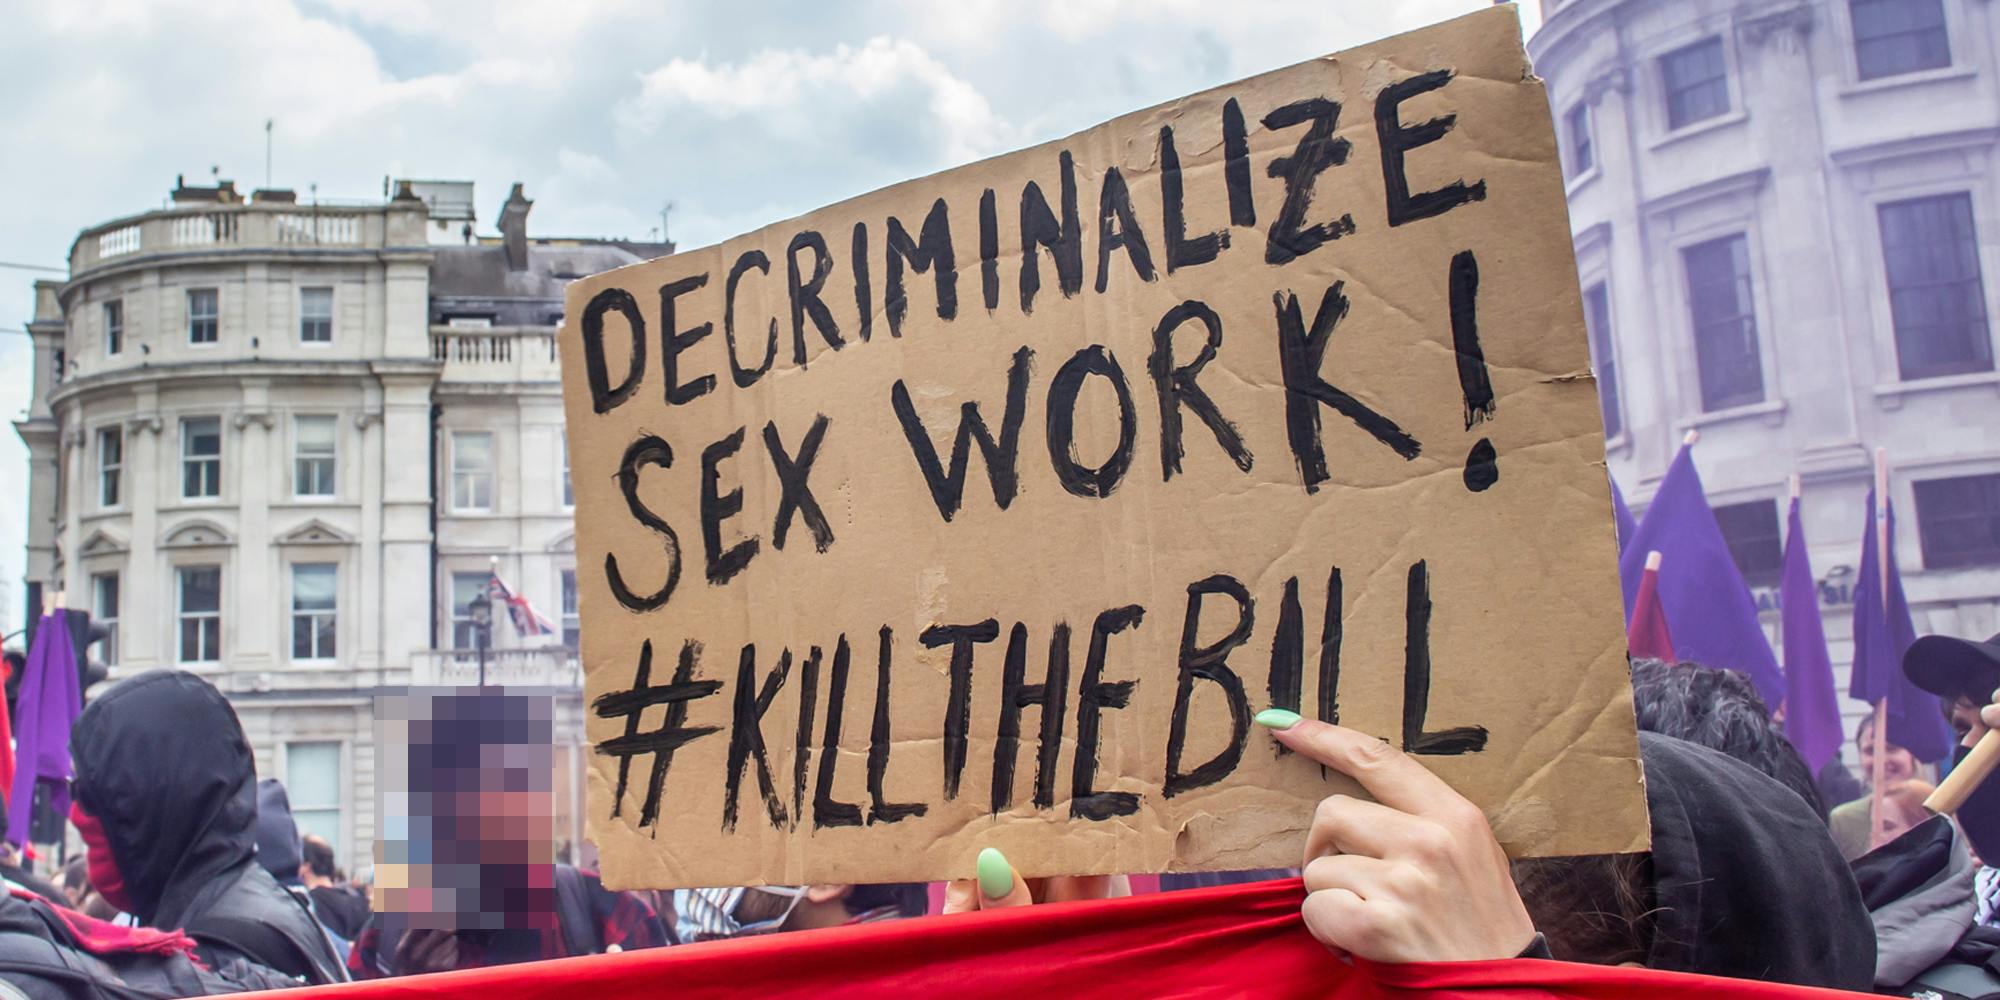 What is the Nordic Model? Sex workers are calling for decriminalization—not compromise